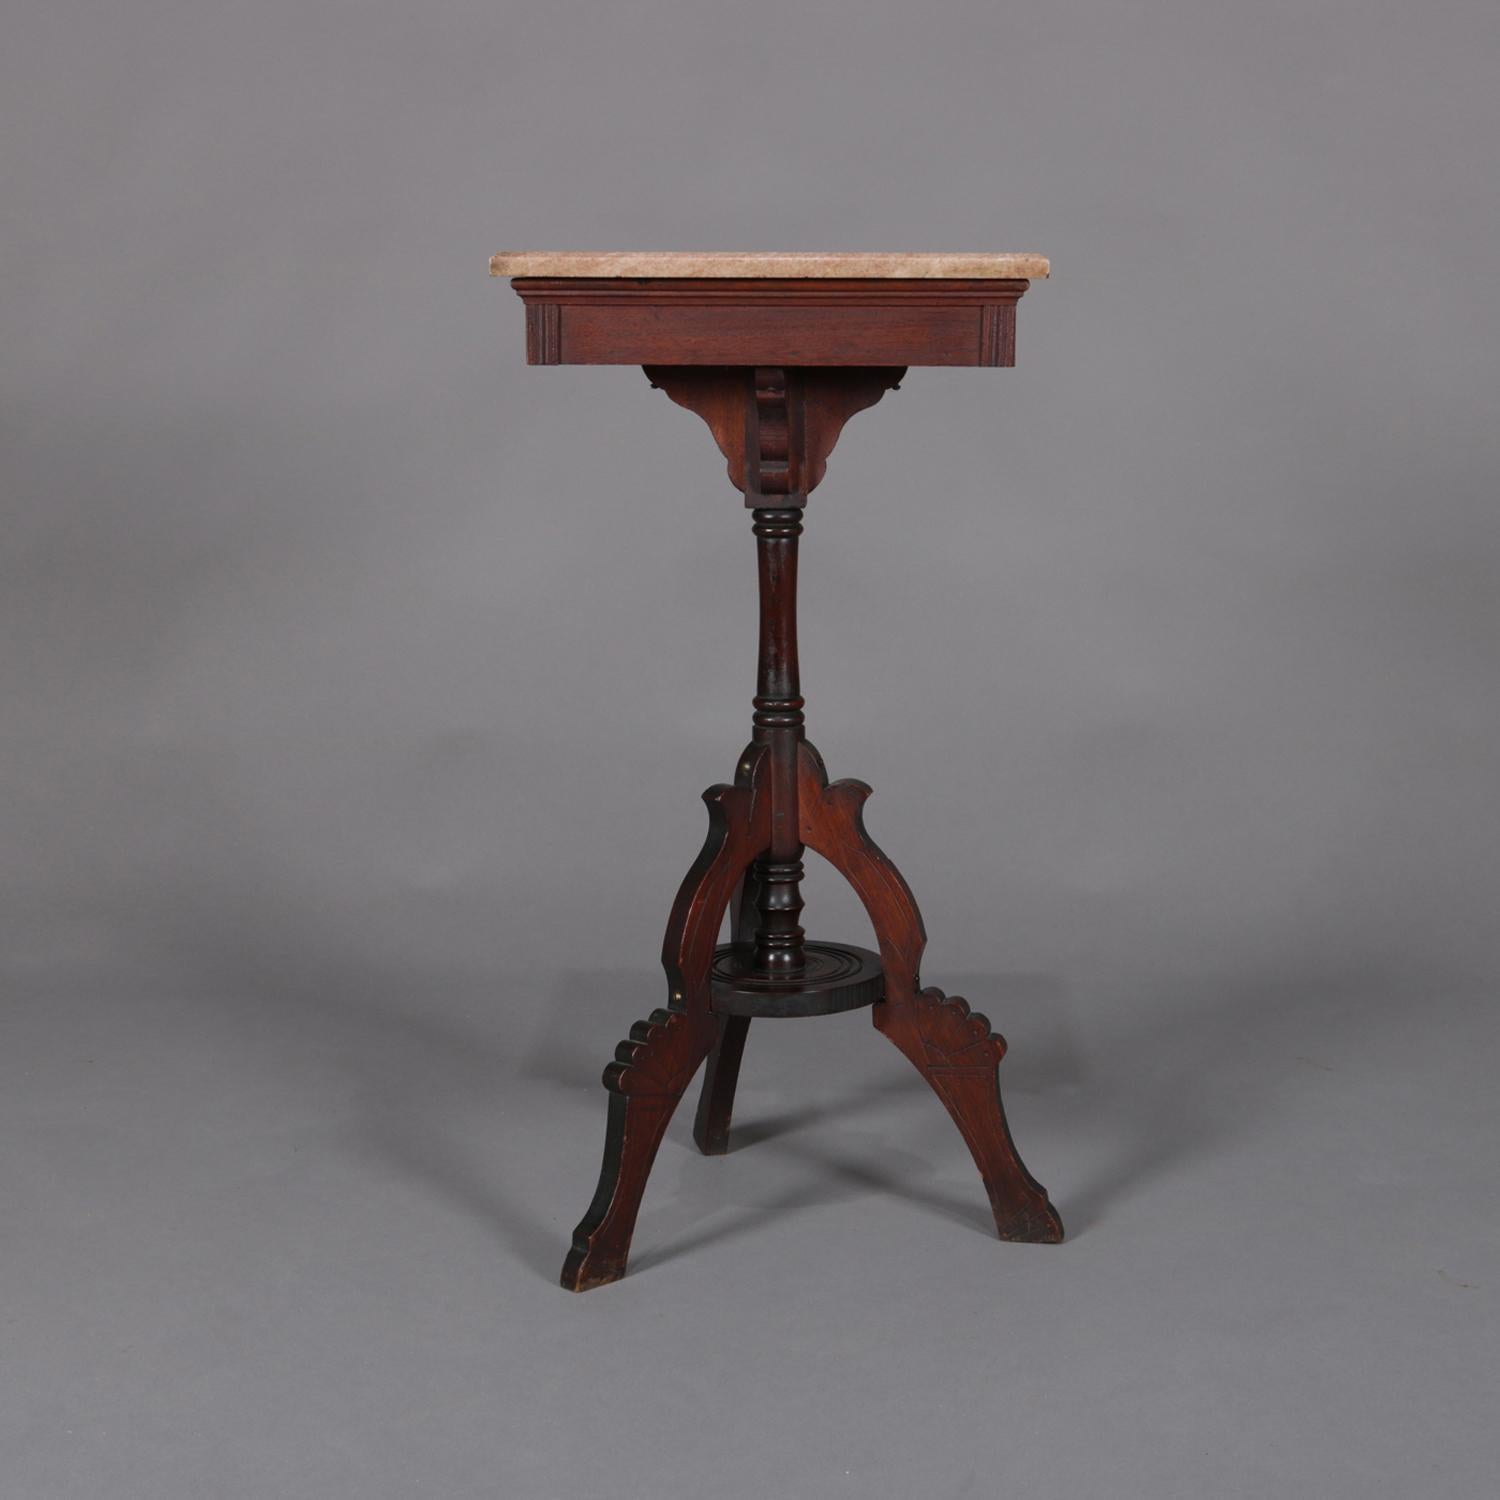 Antique Victorian Eastlake plant display stand features beveled marble top seated on carved walnut base with turned column and seated on three carved and shaped legs, circa 1890

Measures: 31